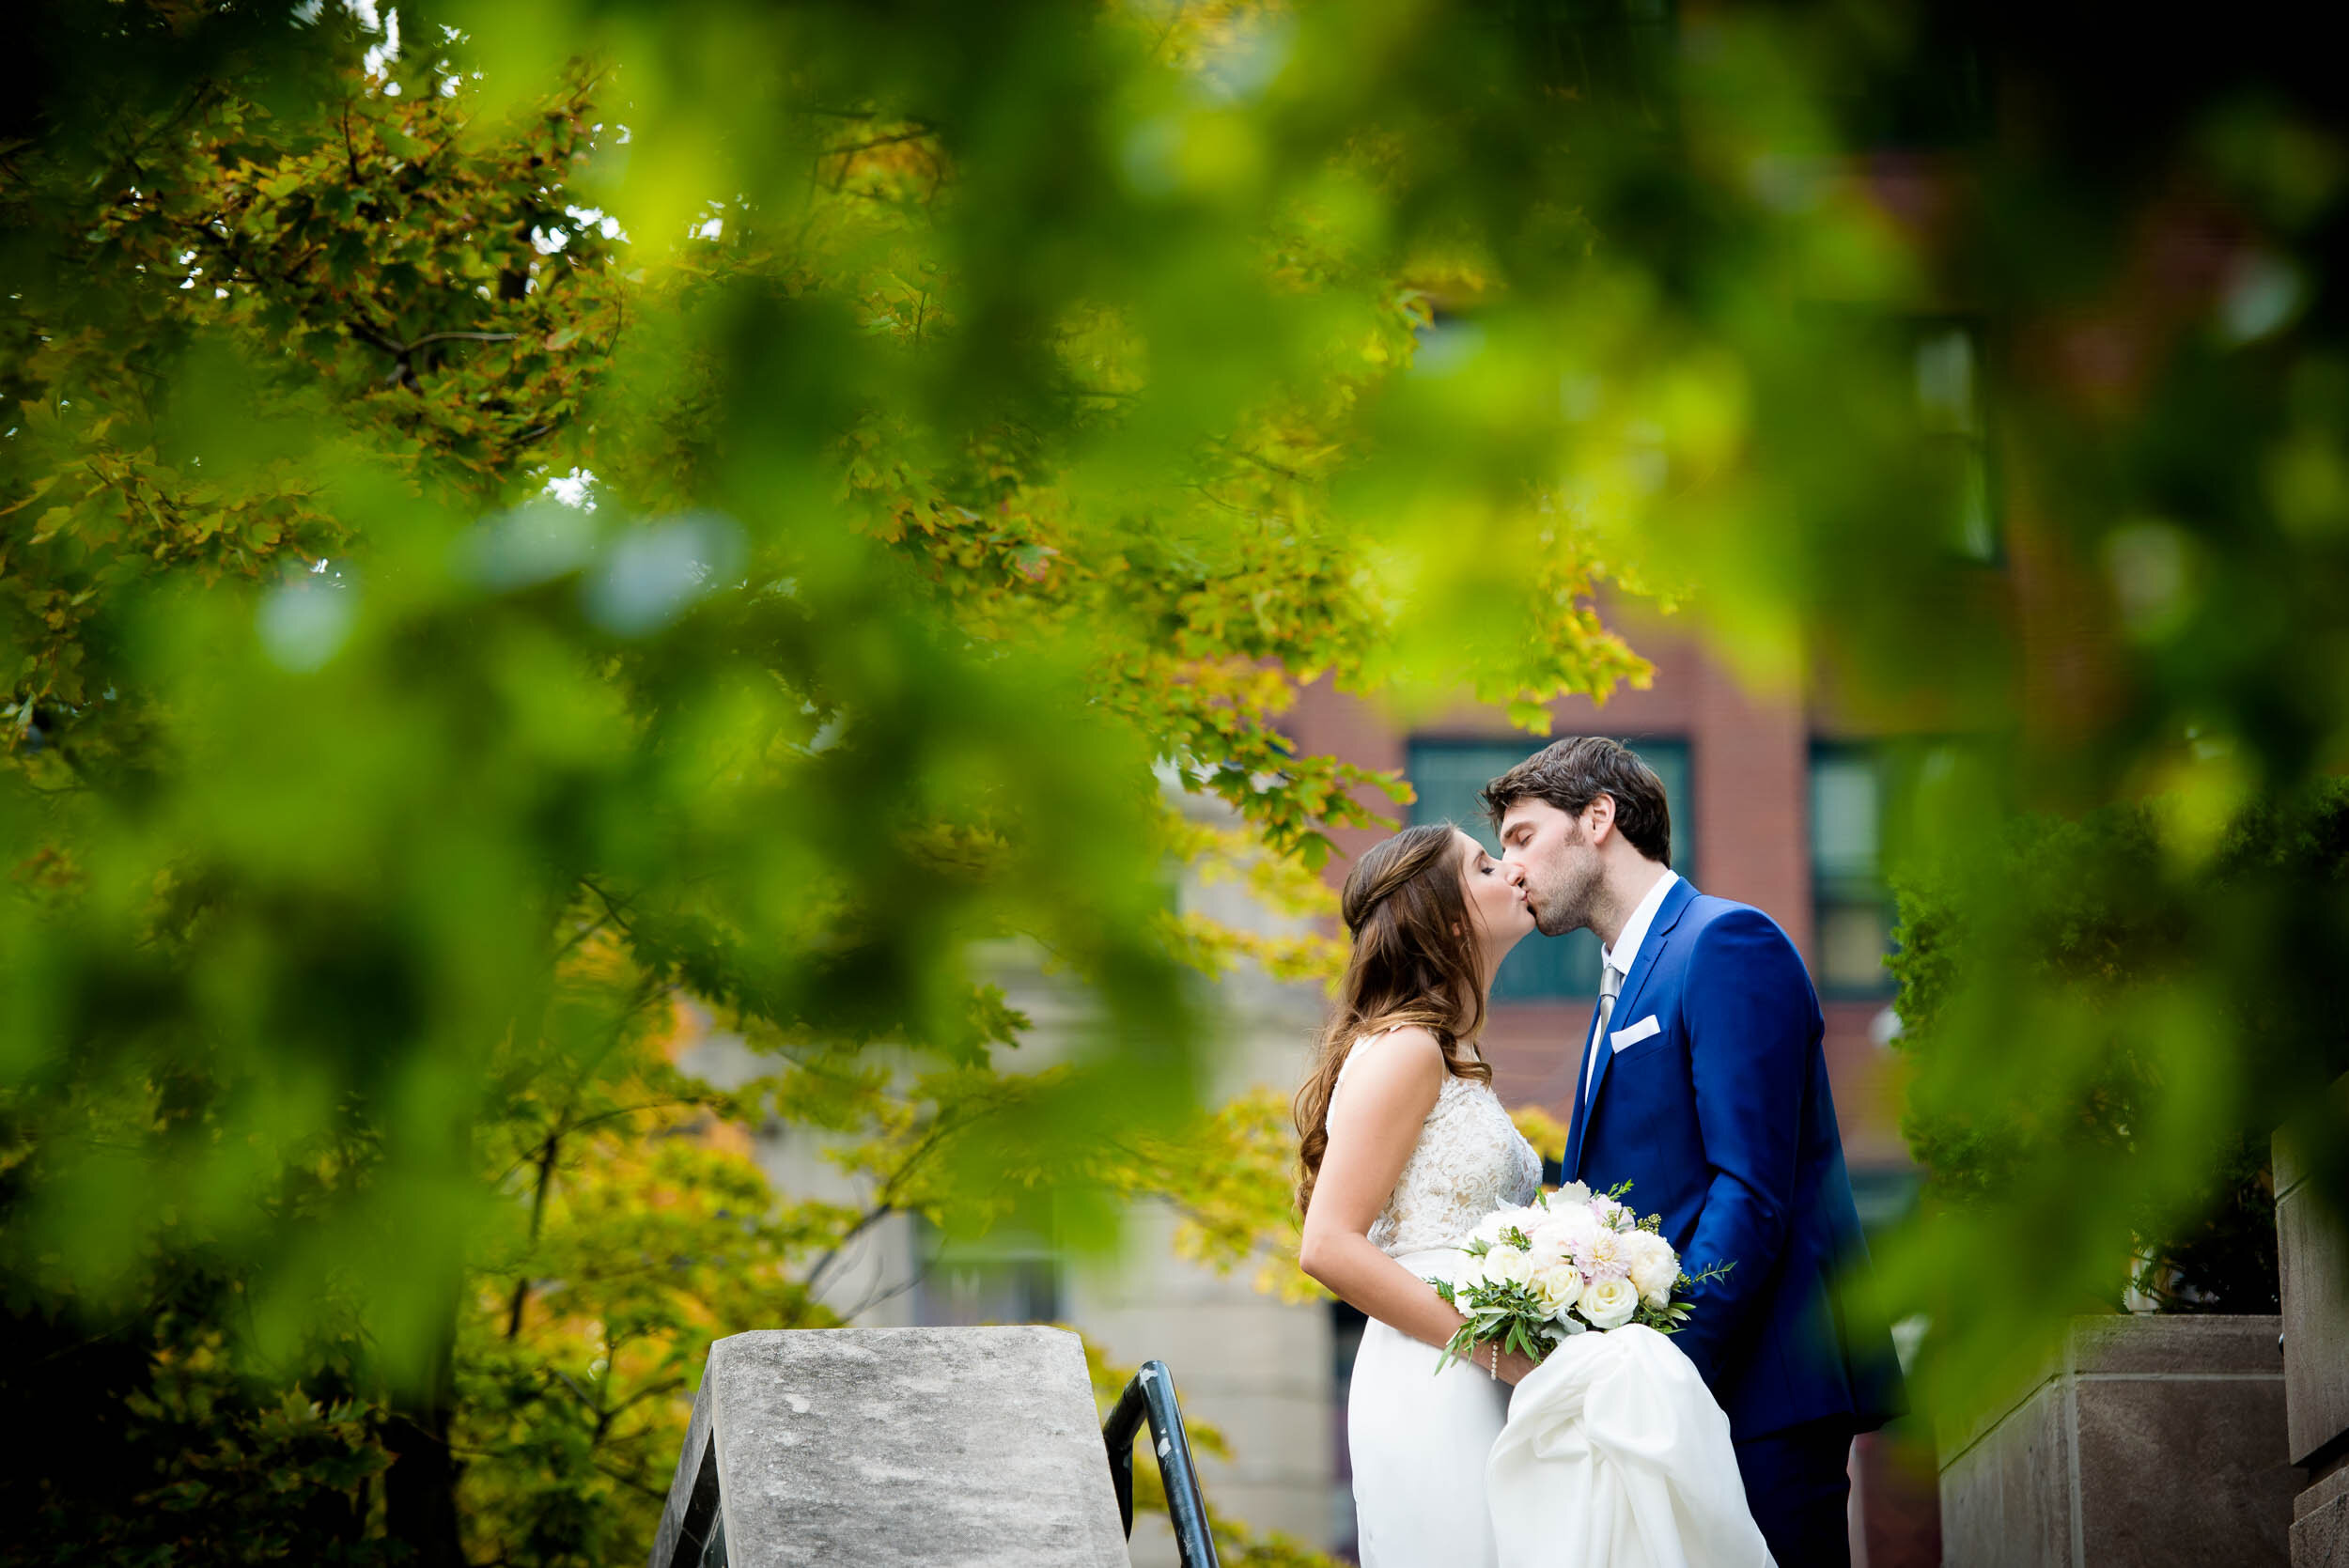 Fun wedding day portrait of bride and groom kissing: Ravenswood Event Center Chicago wedding captured by J. Brown Photography.  